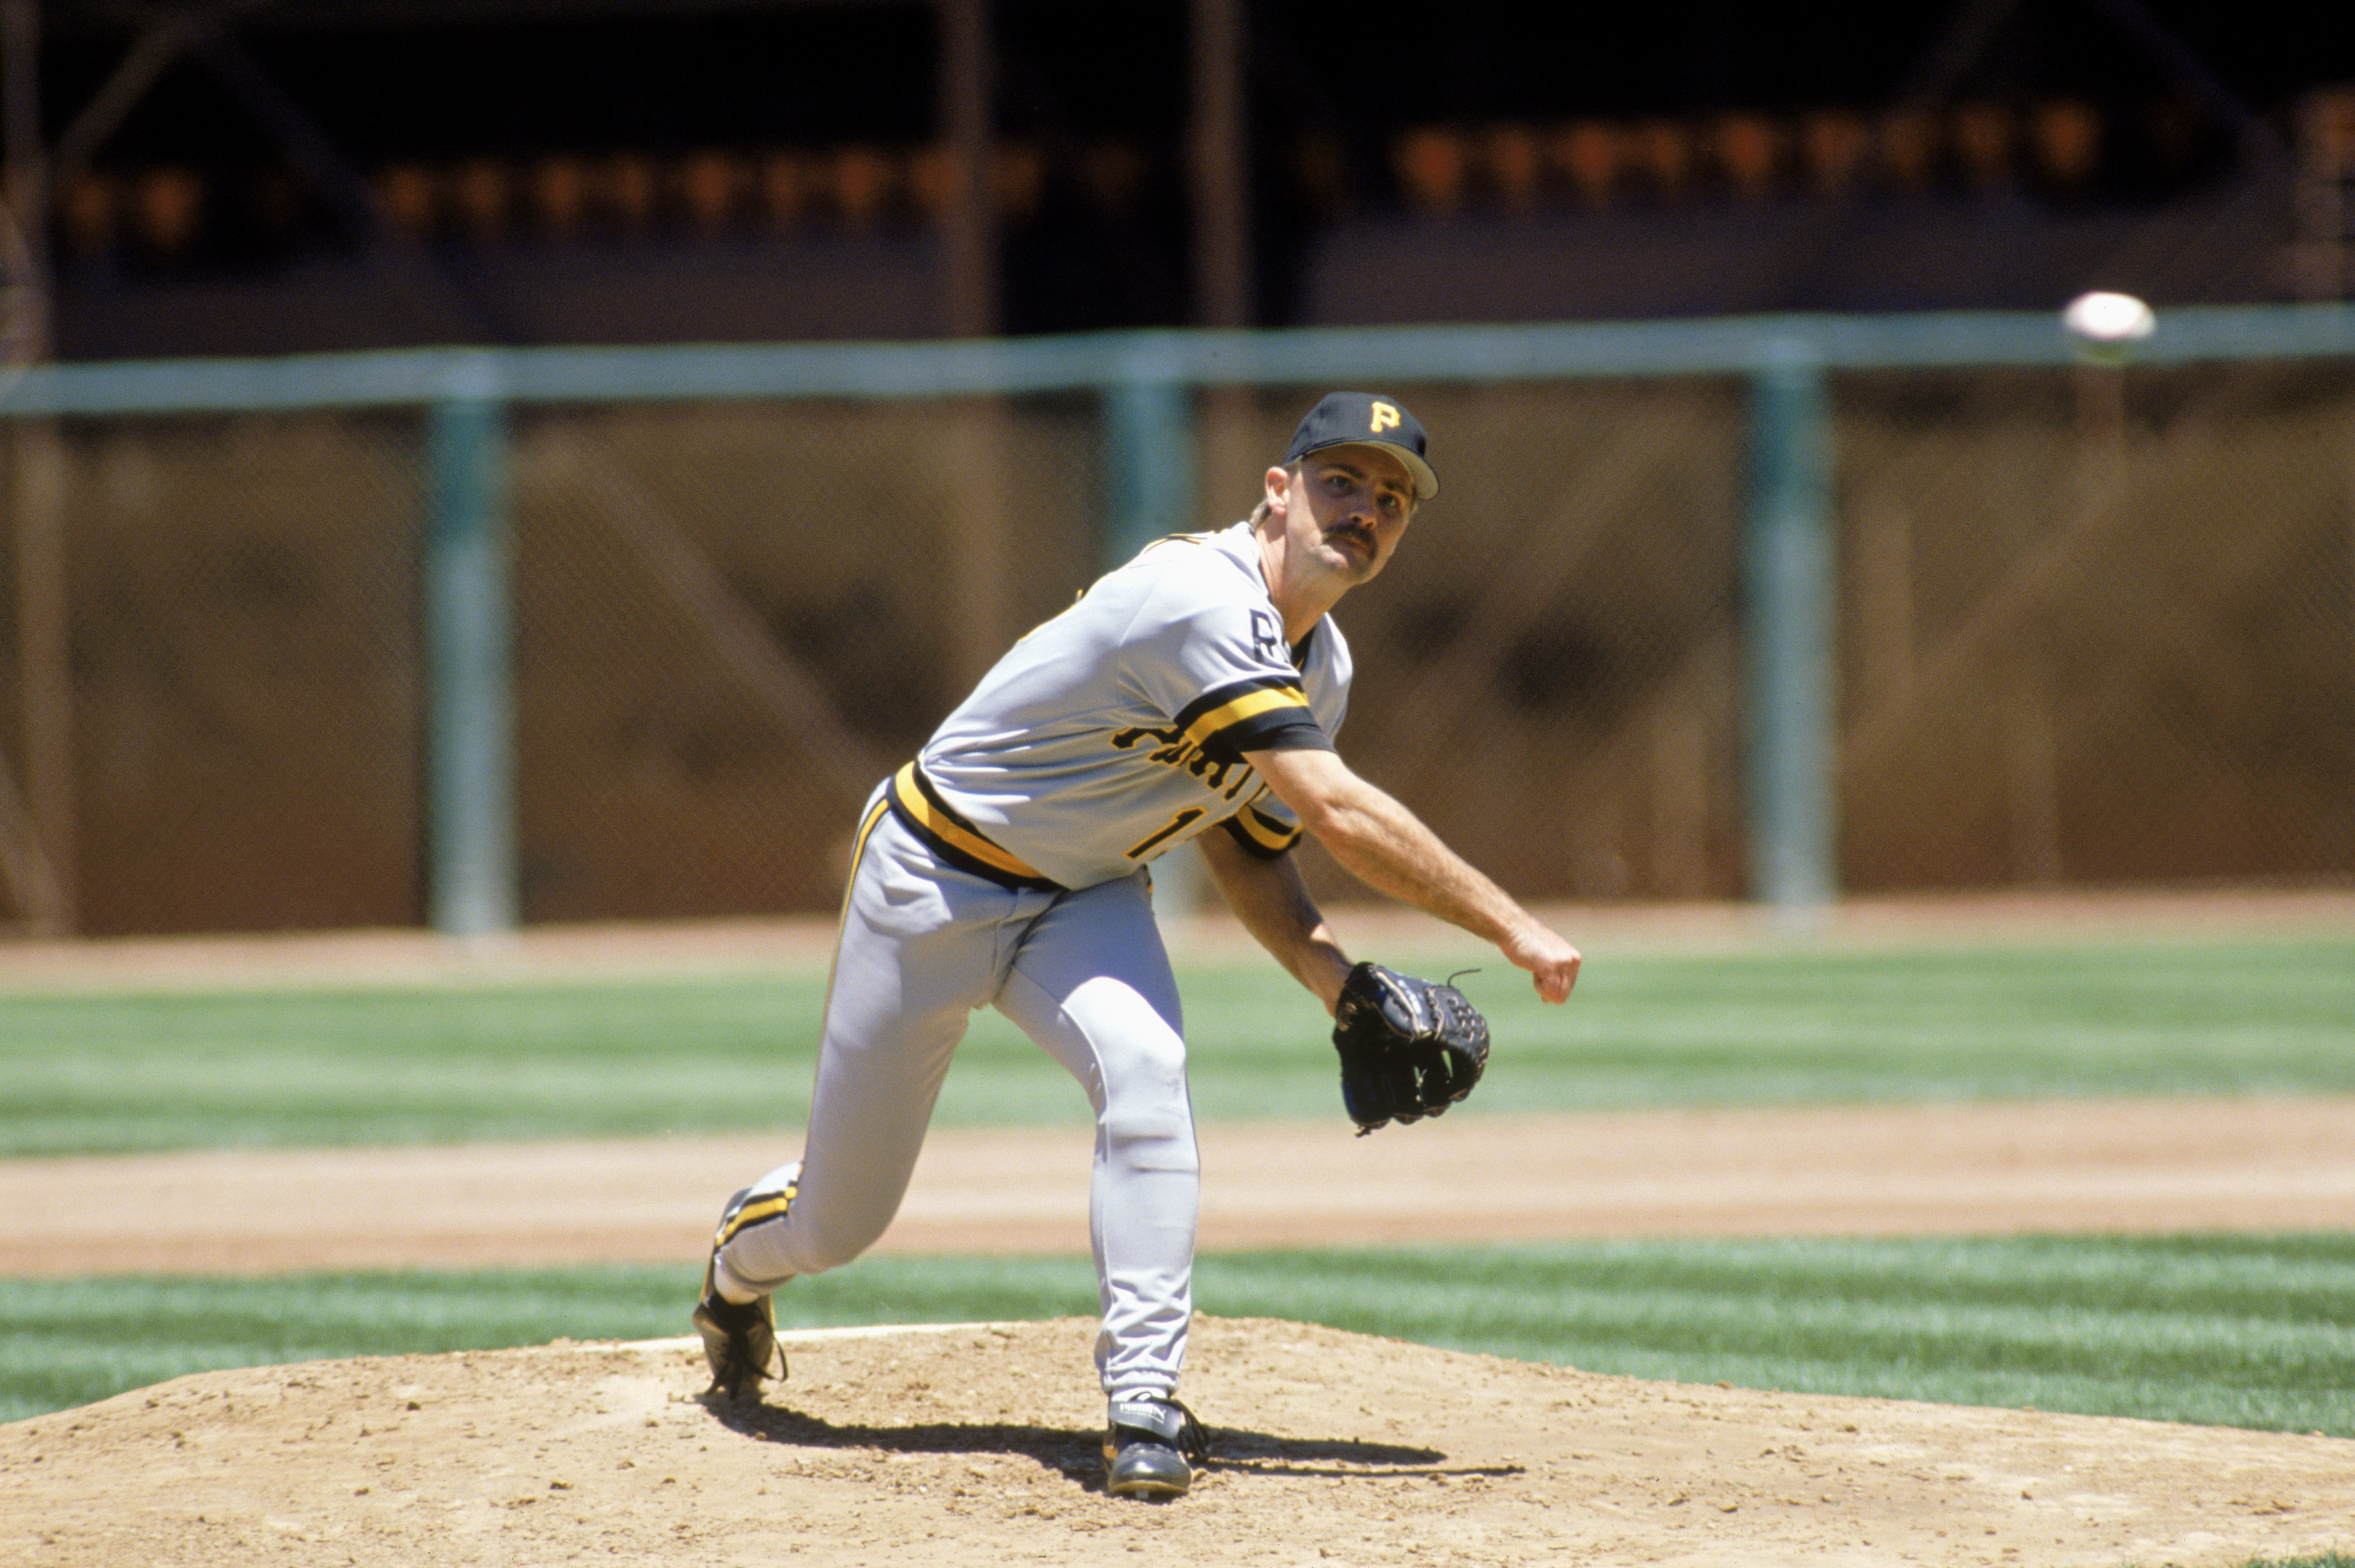 Former Cy Young pitcher Doug Drabek looks to impart his wisdom on